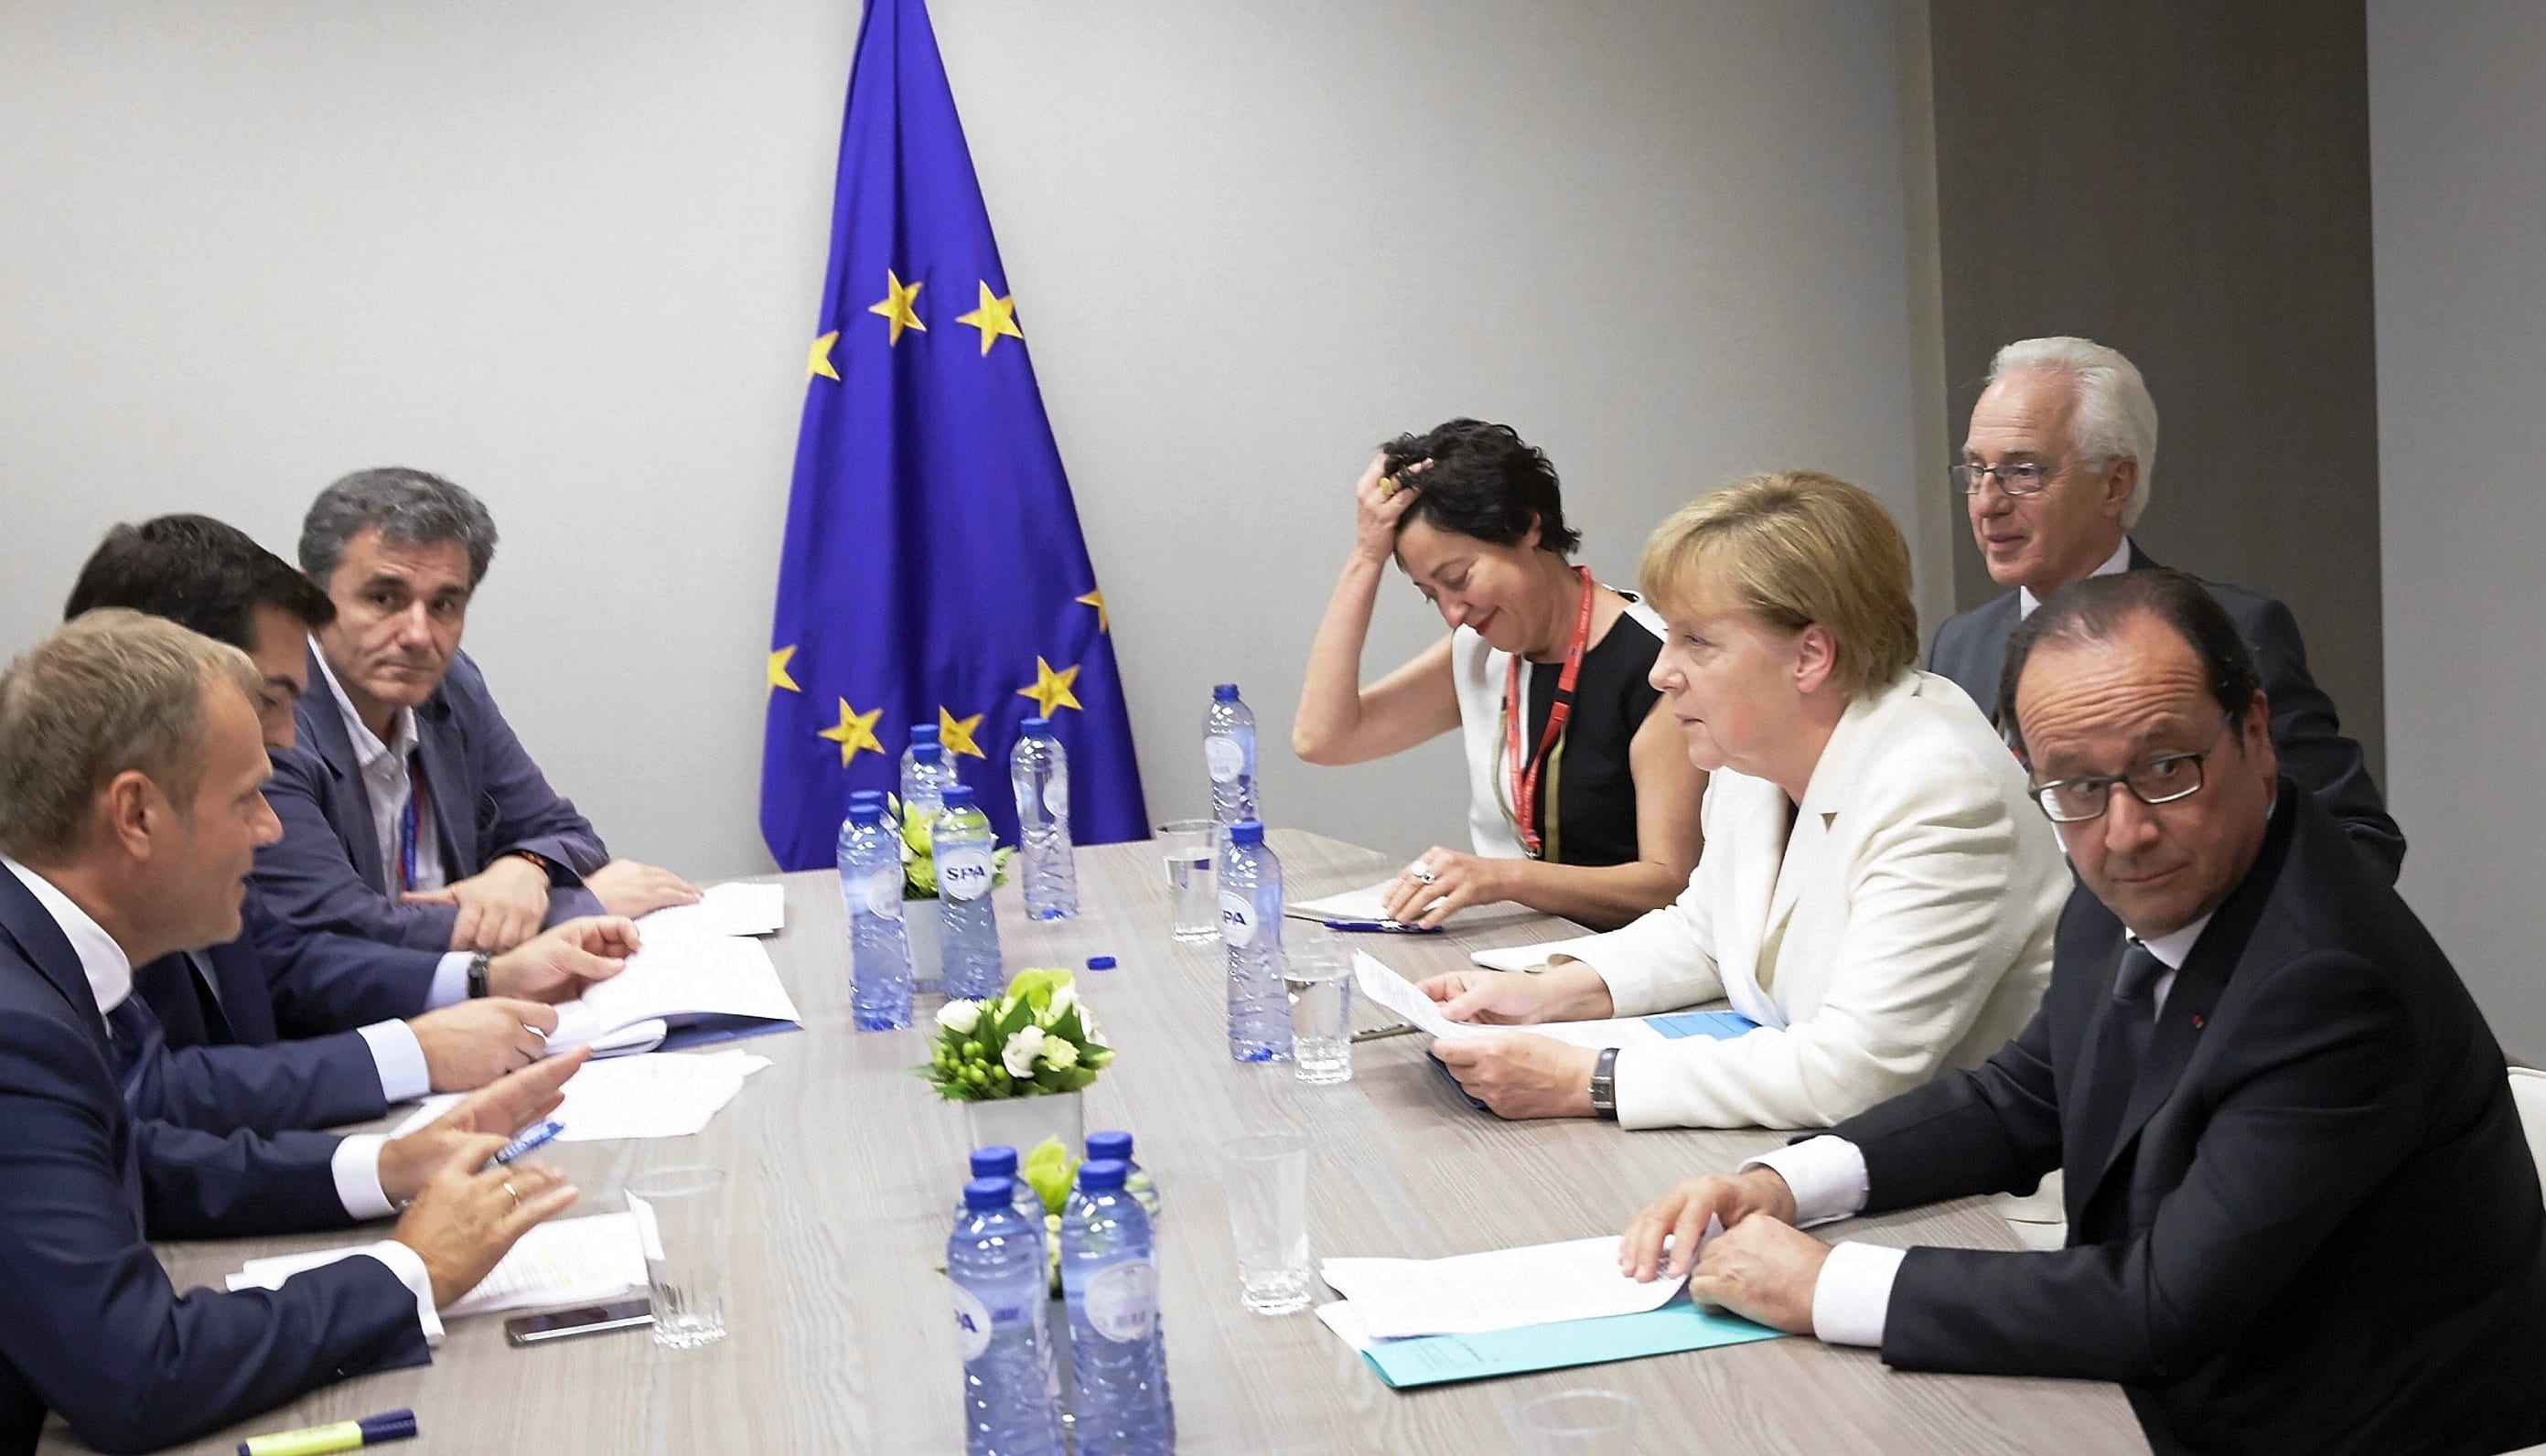 EU council president Donald Tusk Greek Prime Minister Alexis Tsipras, Greek Finance Minister Euclid Tsakalotos, French President Francois Hollande and German Chancellor Angela Merkel attend a meeting in Brussels.